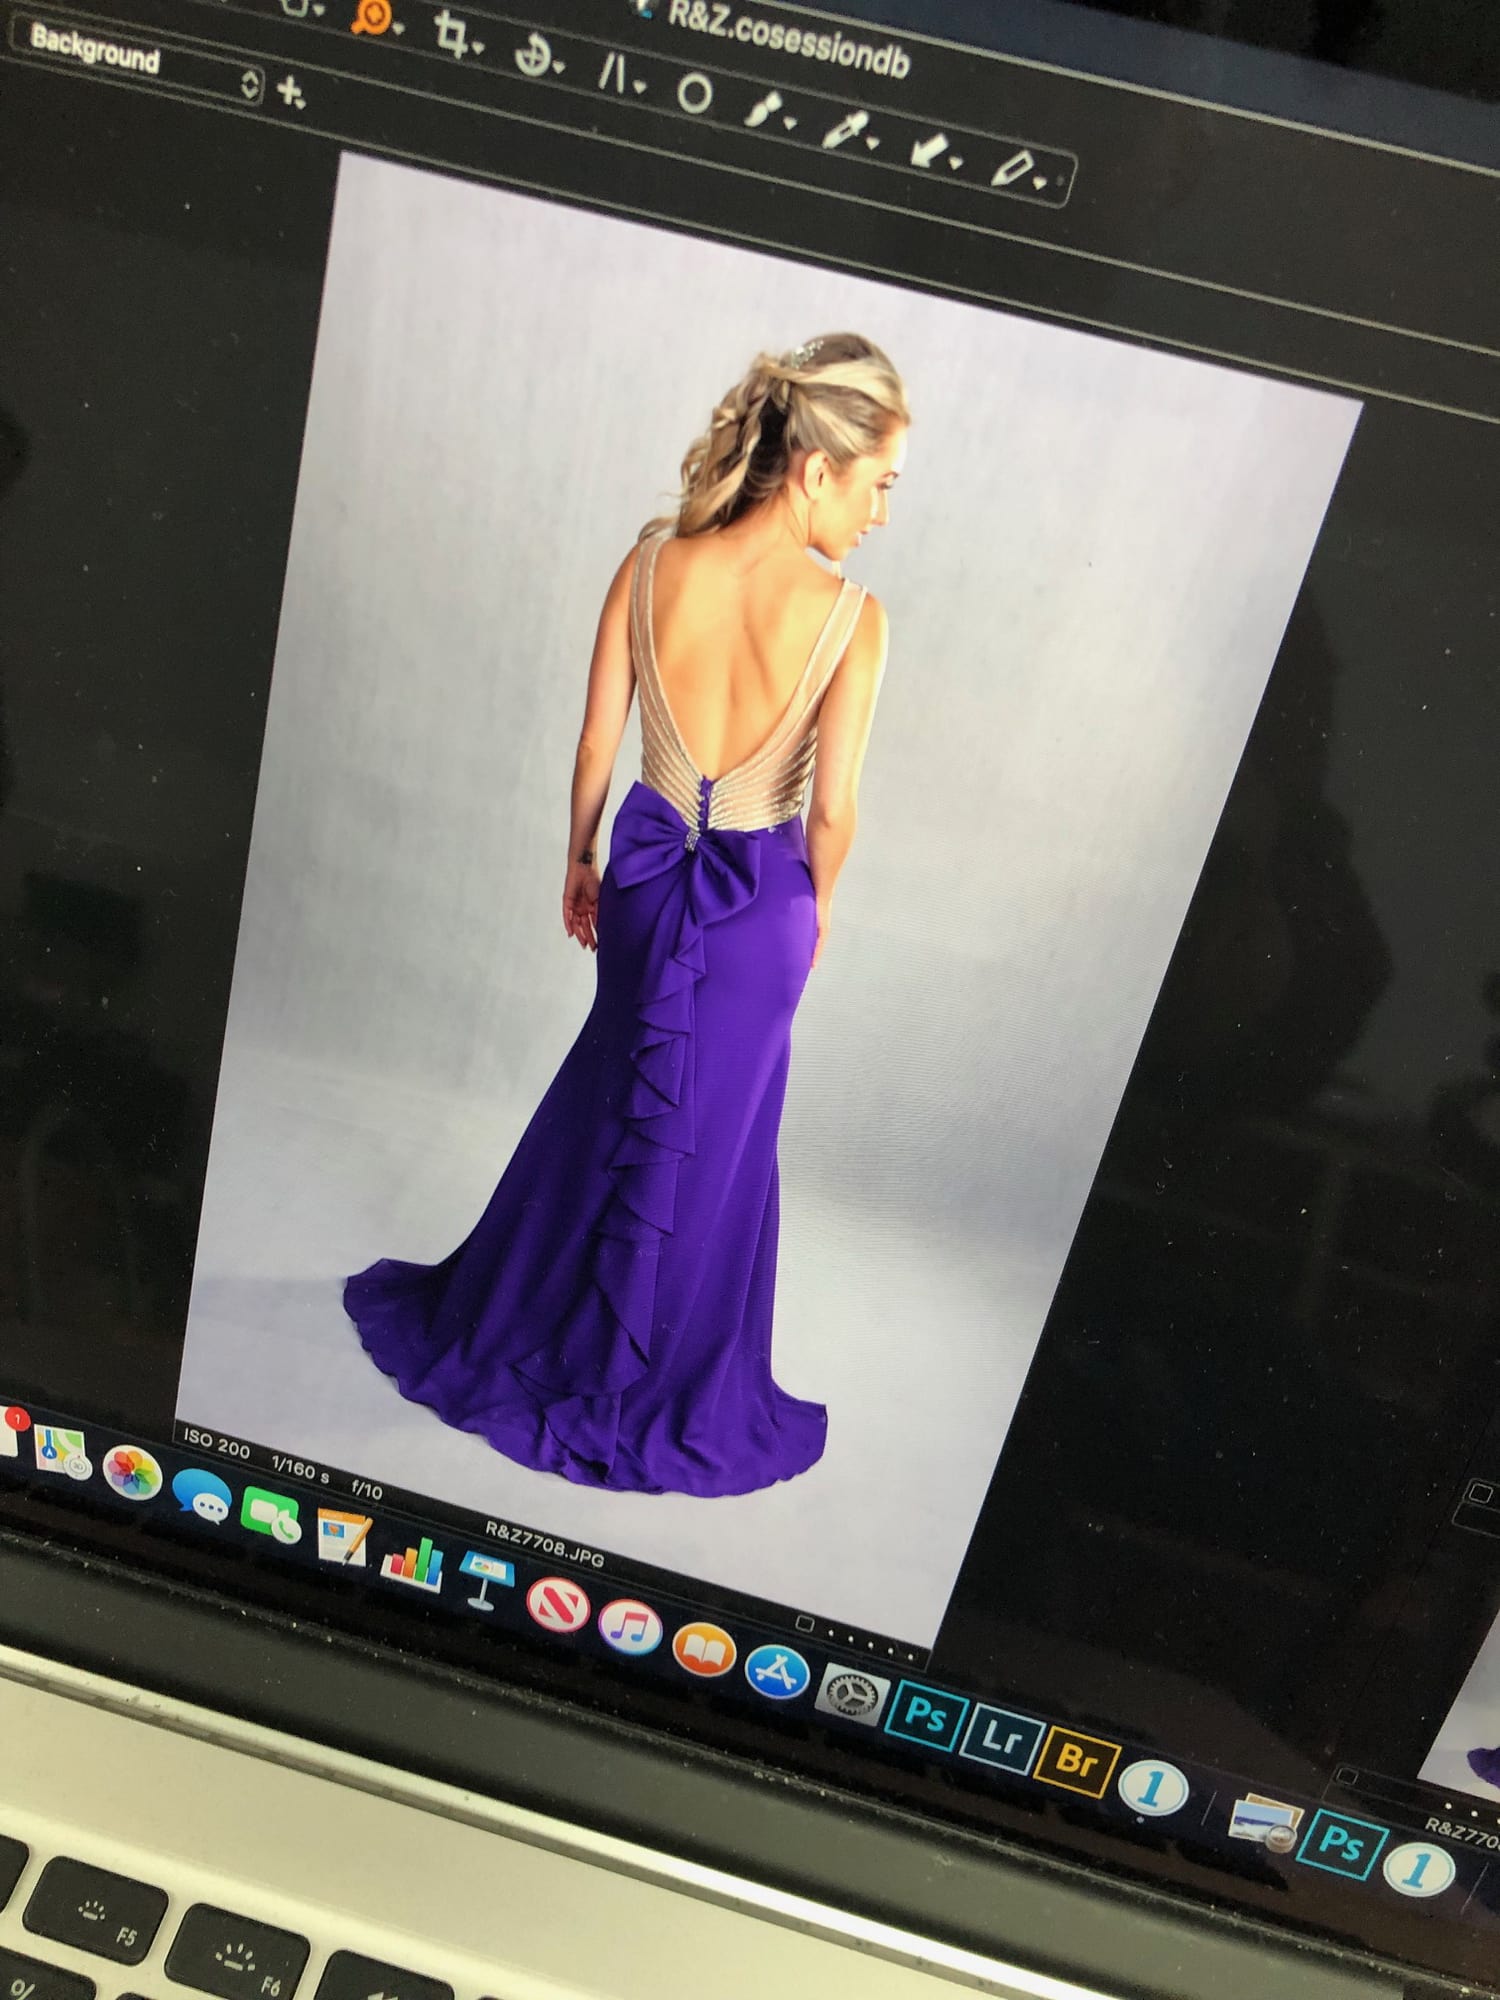 On site studio photography really works for the client, they have access to the stock, the tethered laptop enables them to view and judge as the shoot progresses.